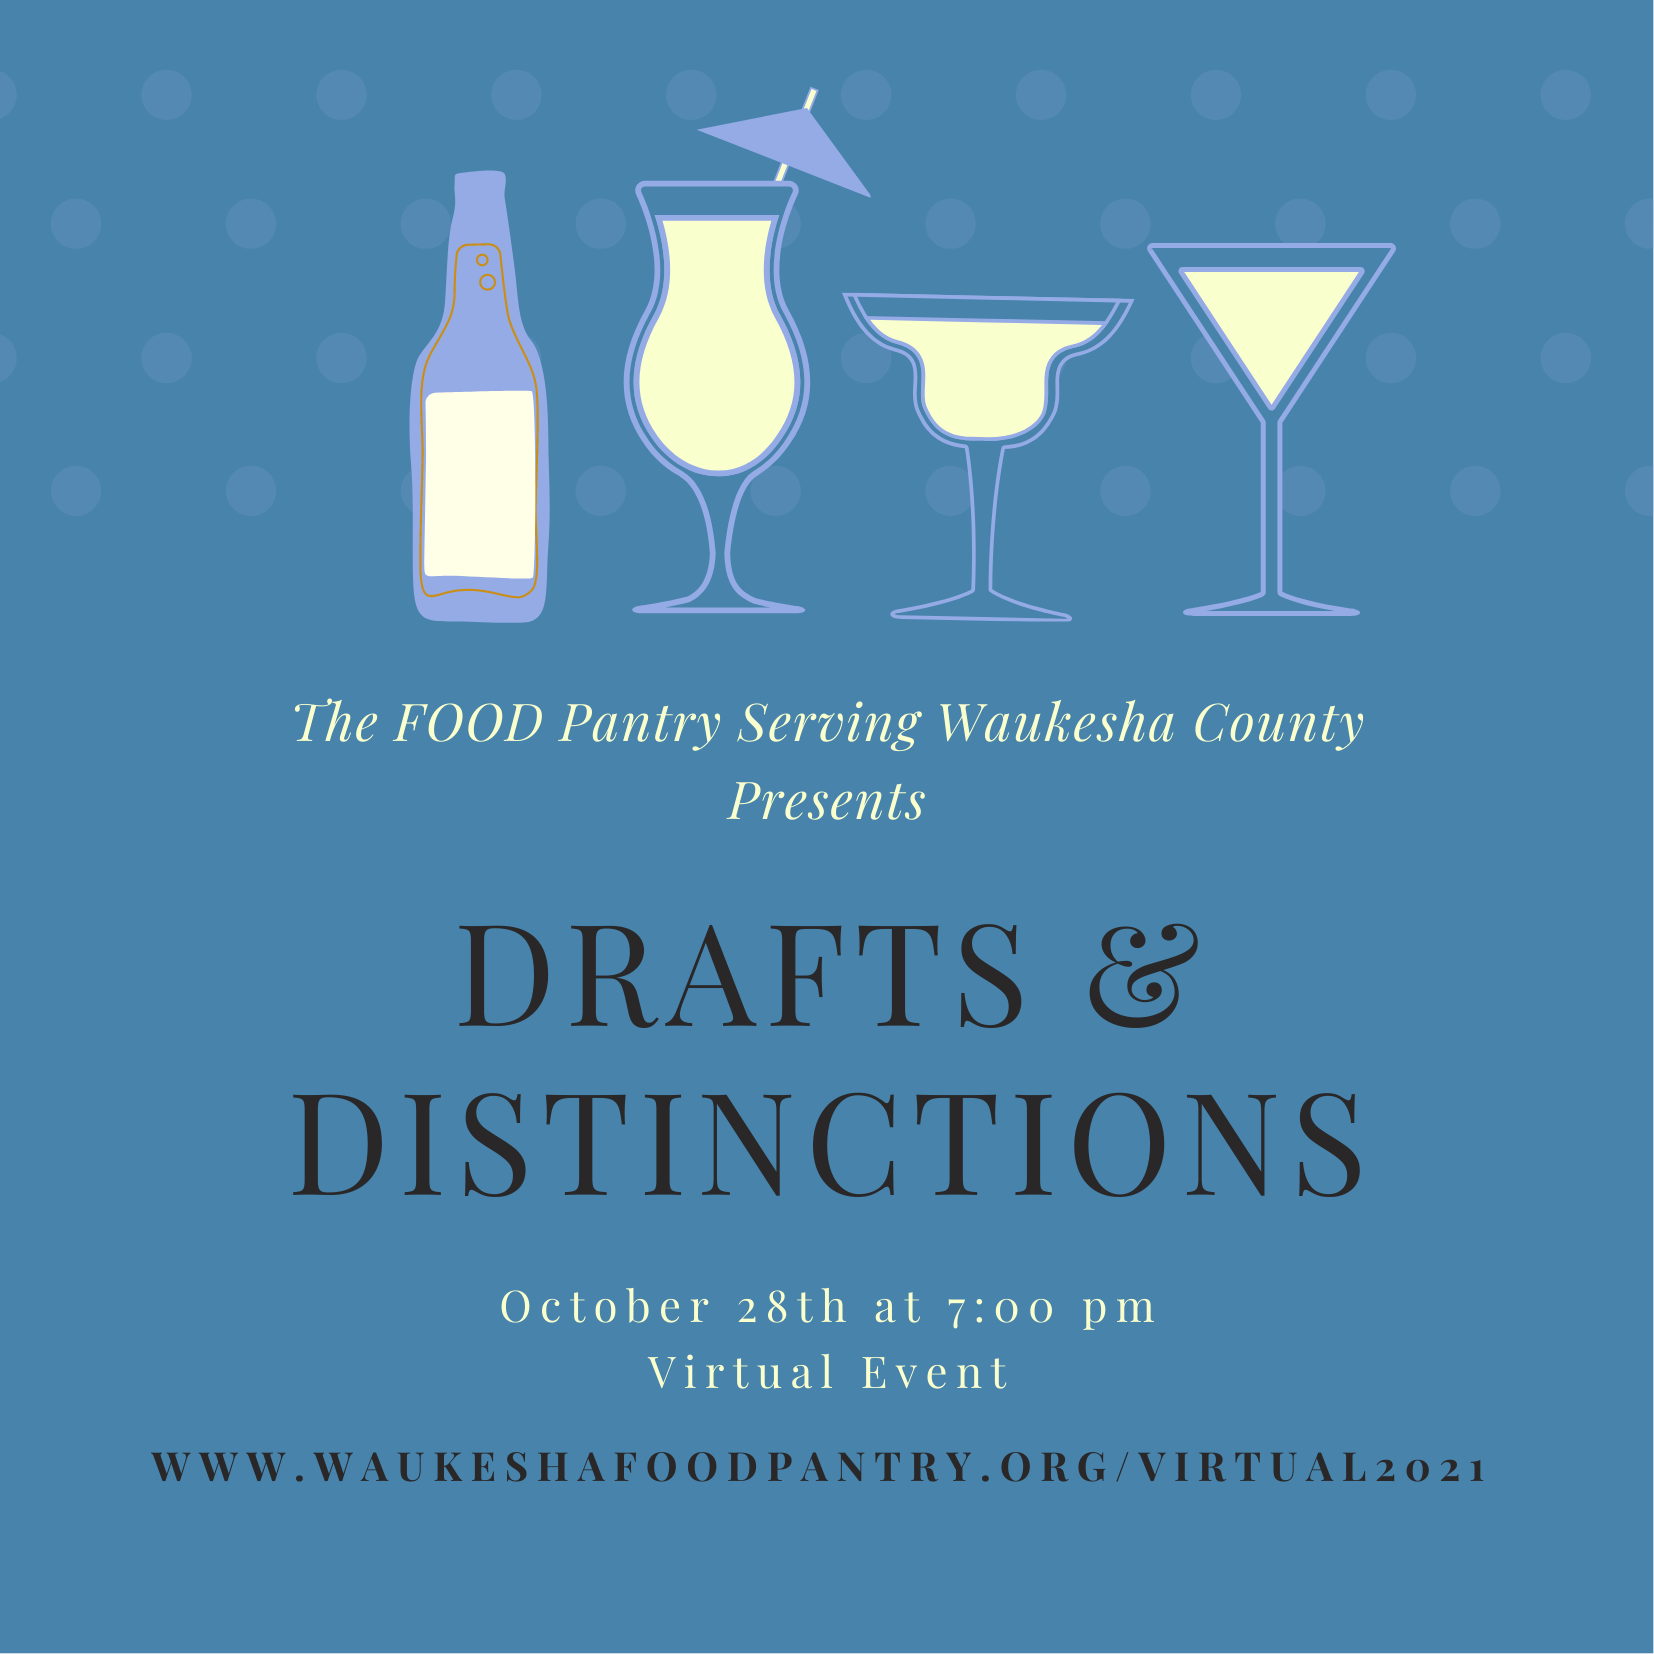 Drafts and distinctions virtual event October 28 at 7pm